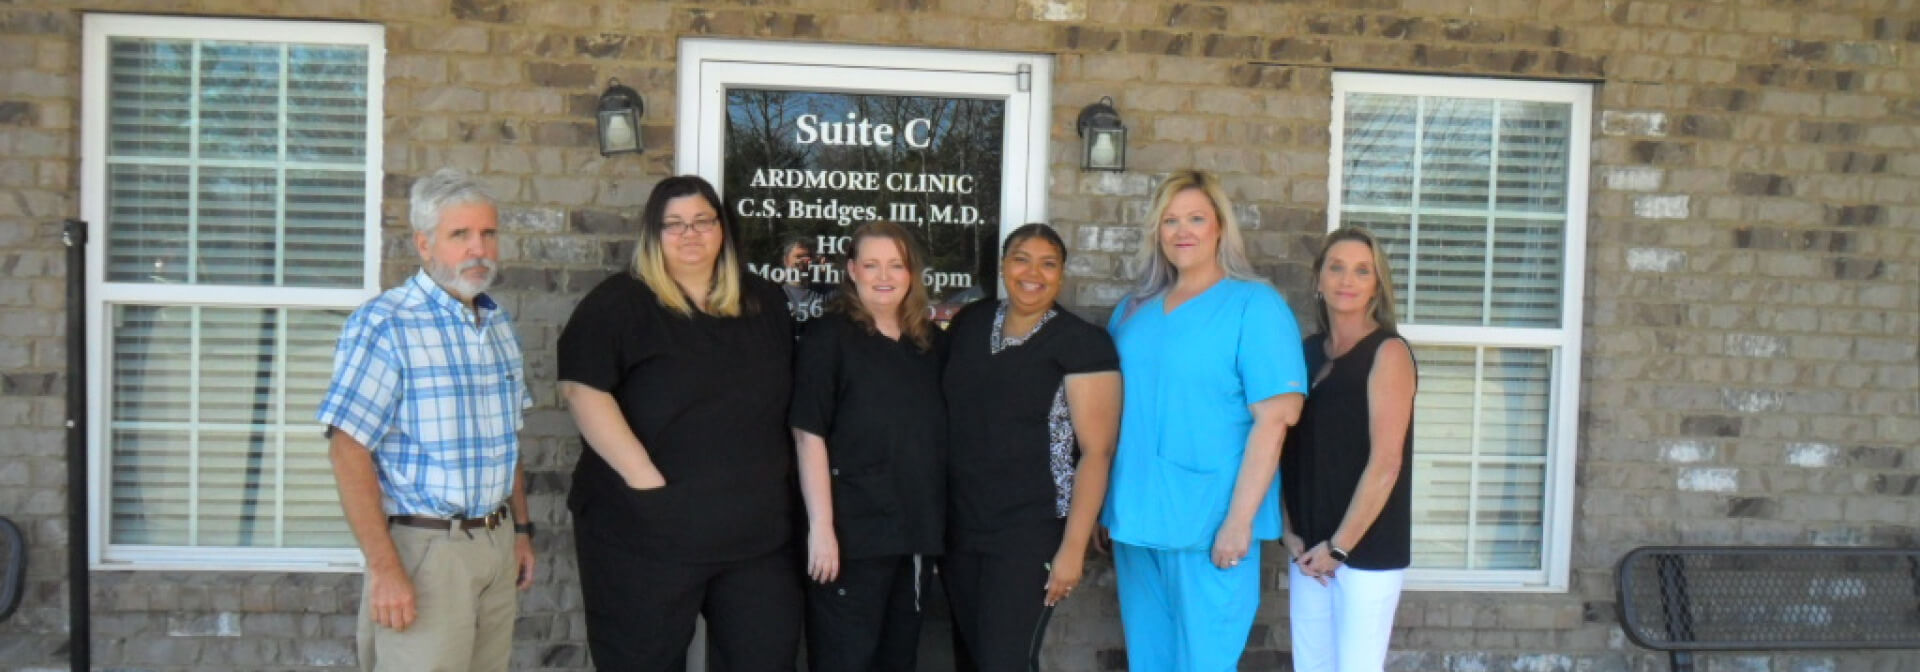 Ardmore Clinic Header Our Team Page